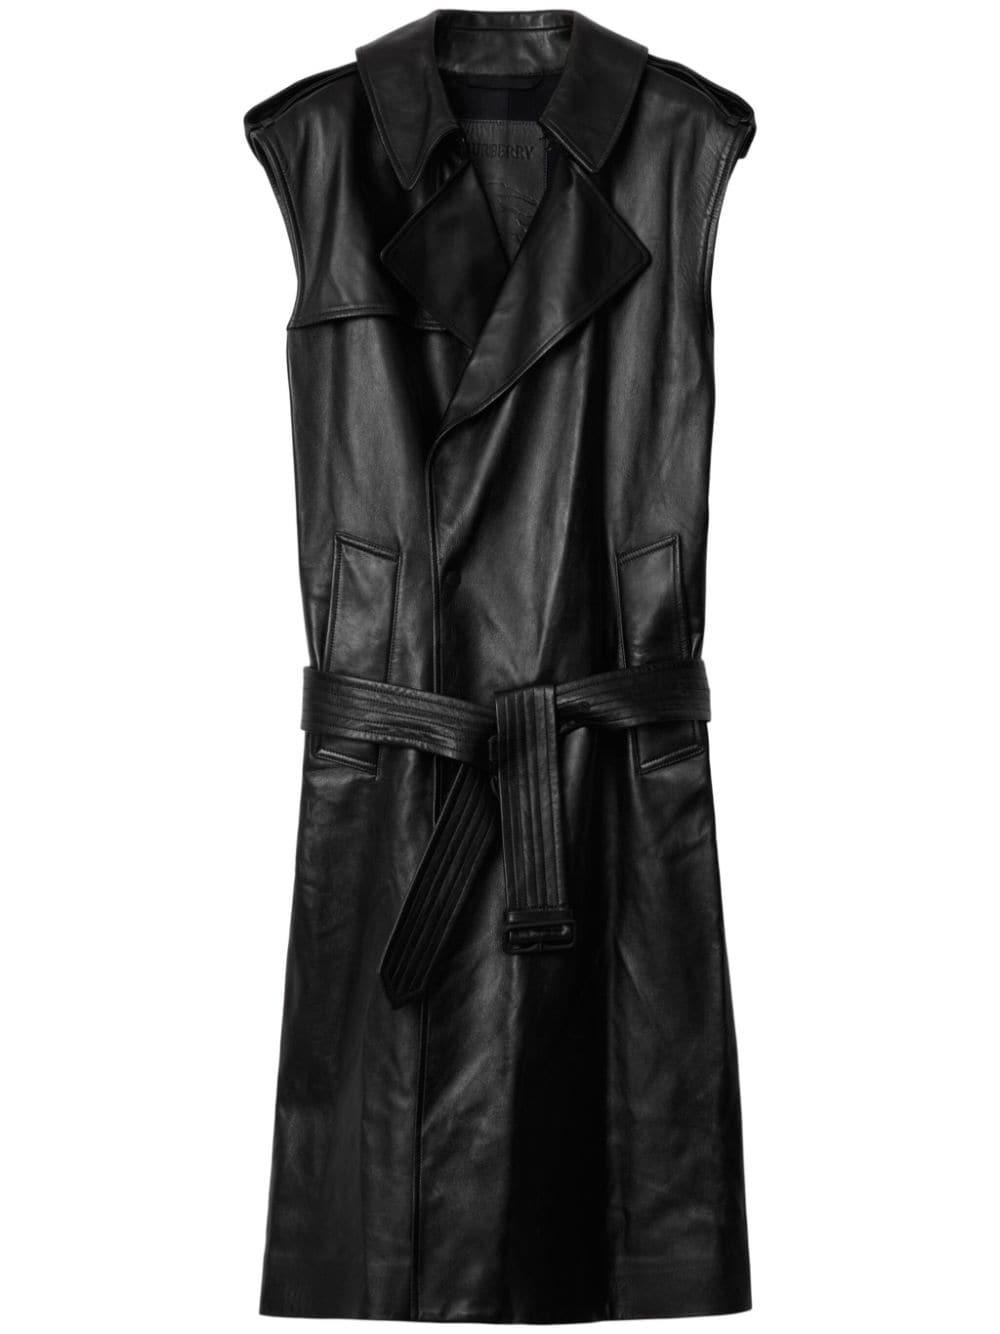 Burberry leather trench coat - Black